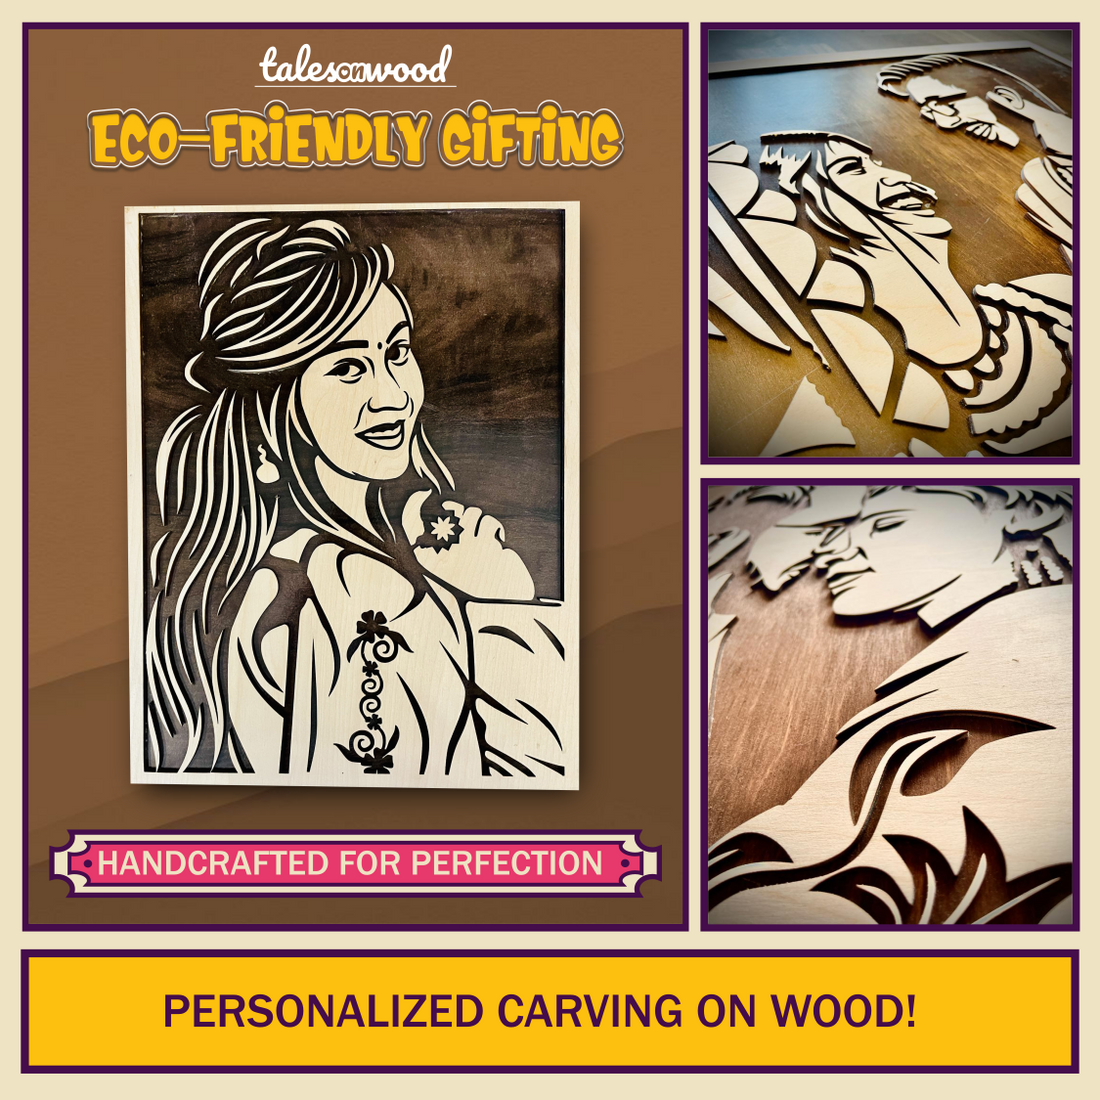 A Masterpiece in Wood: The Art of Carving.